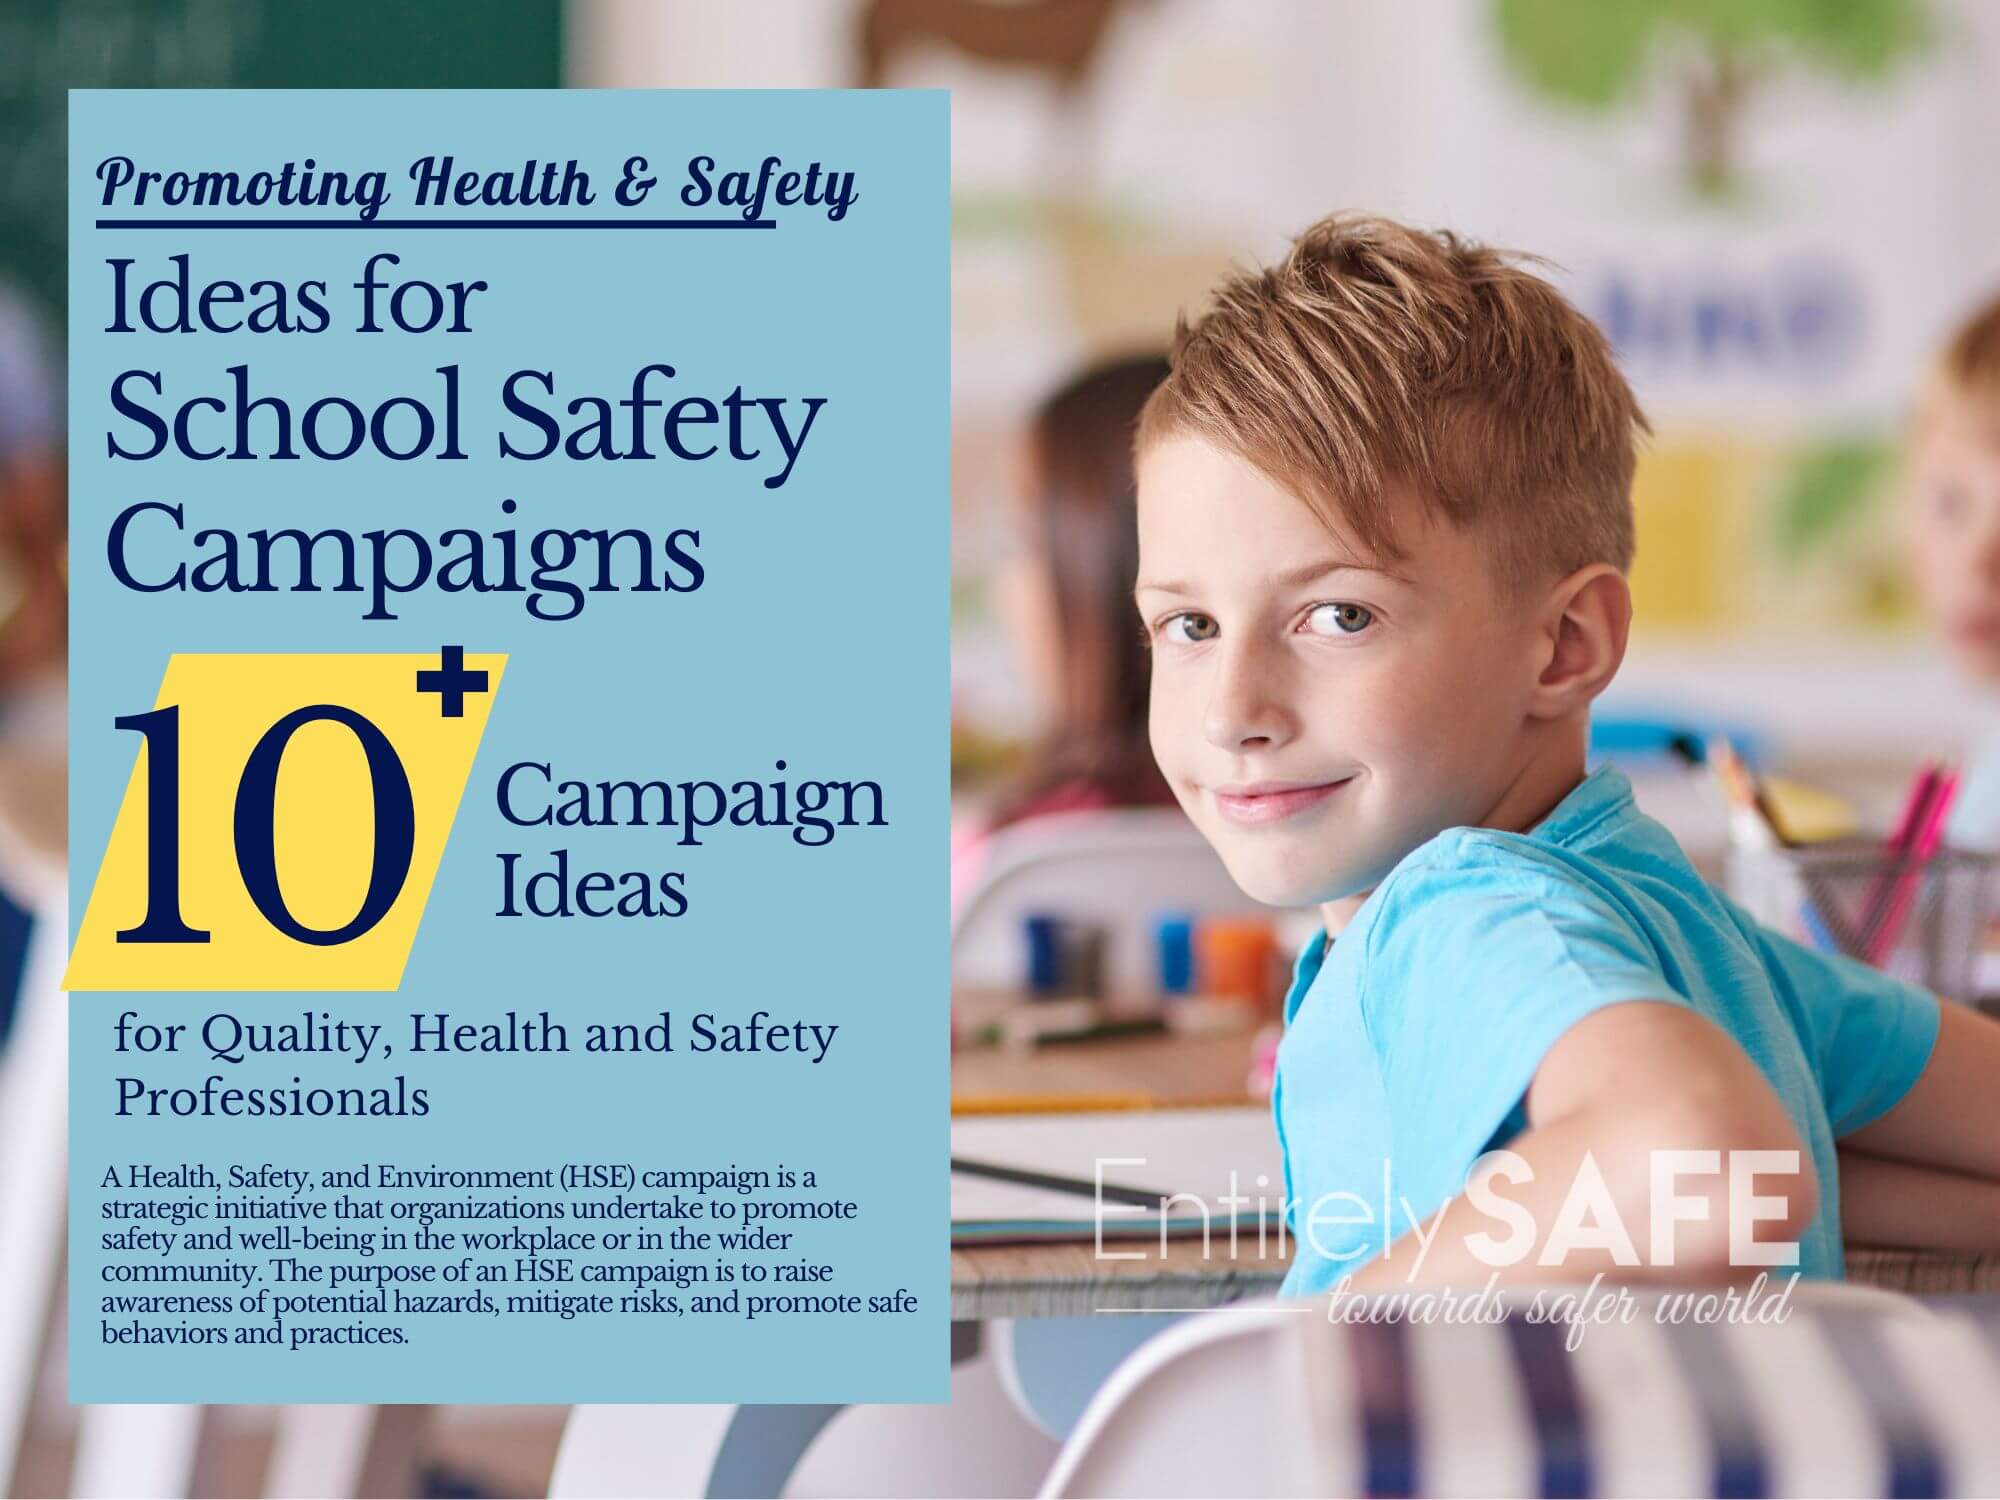 Health, Safety and Security Campaigns for Schools and Universitites